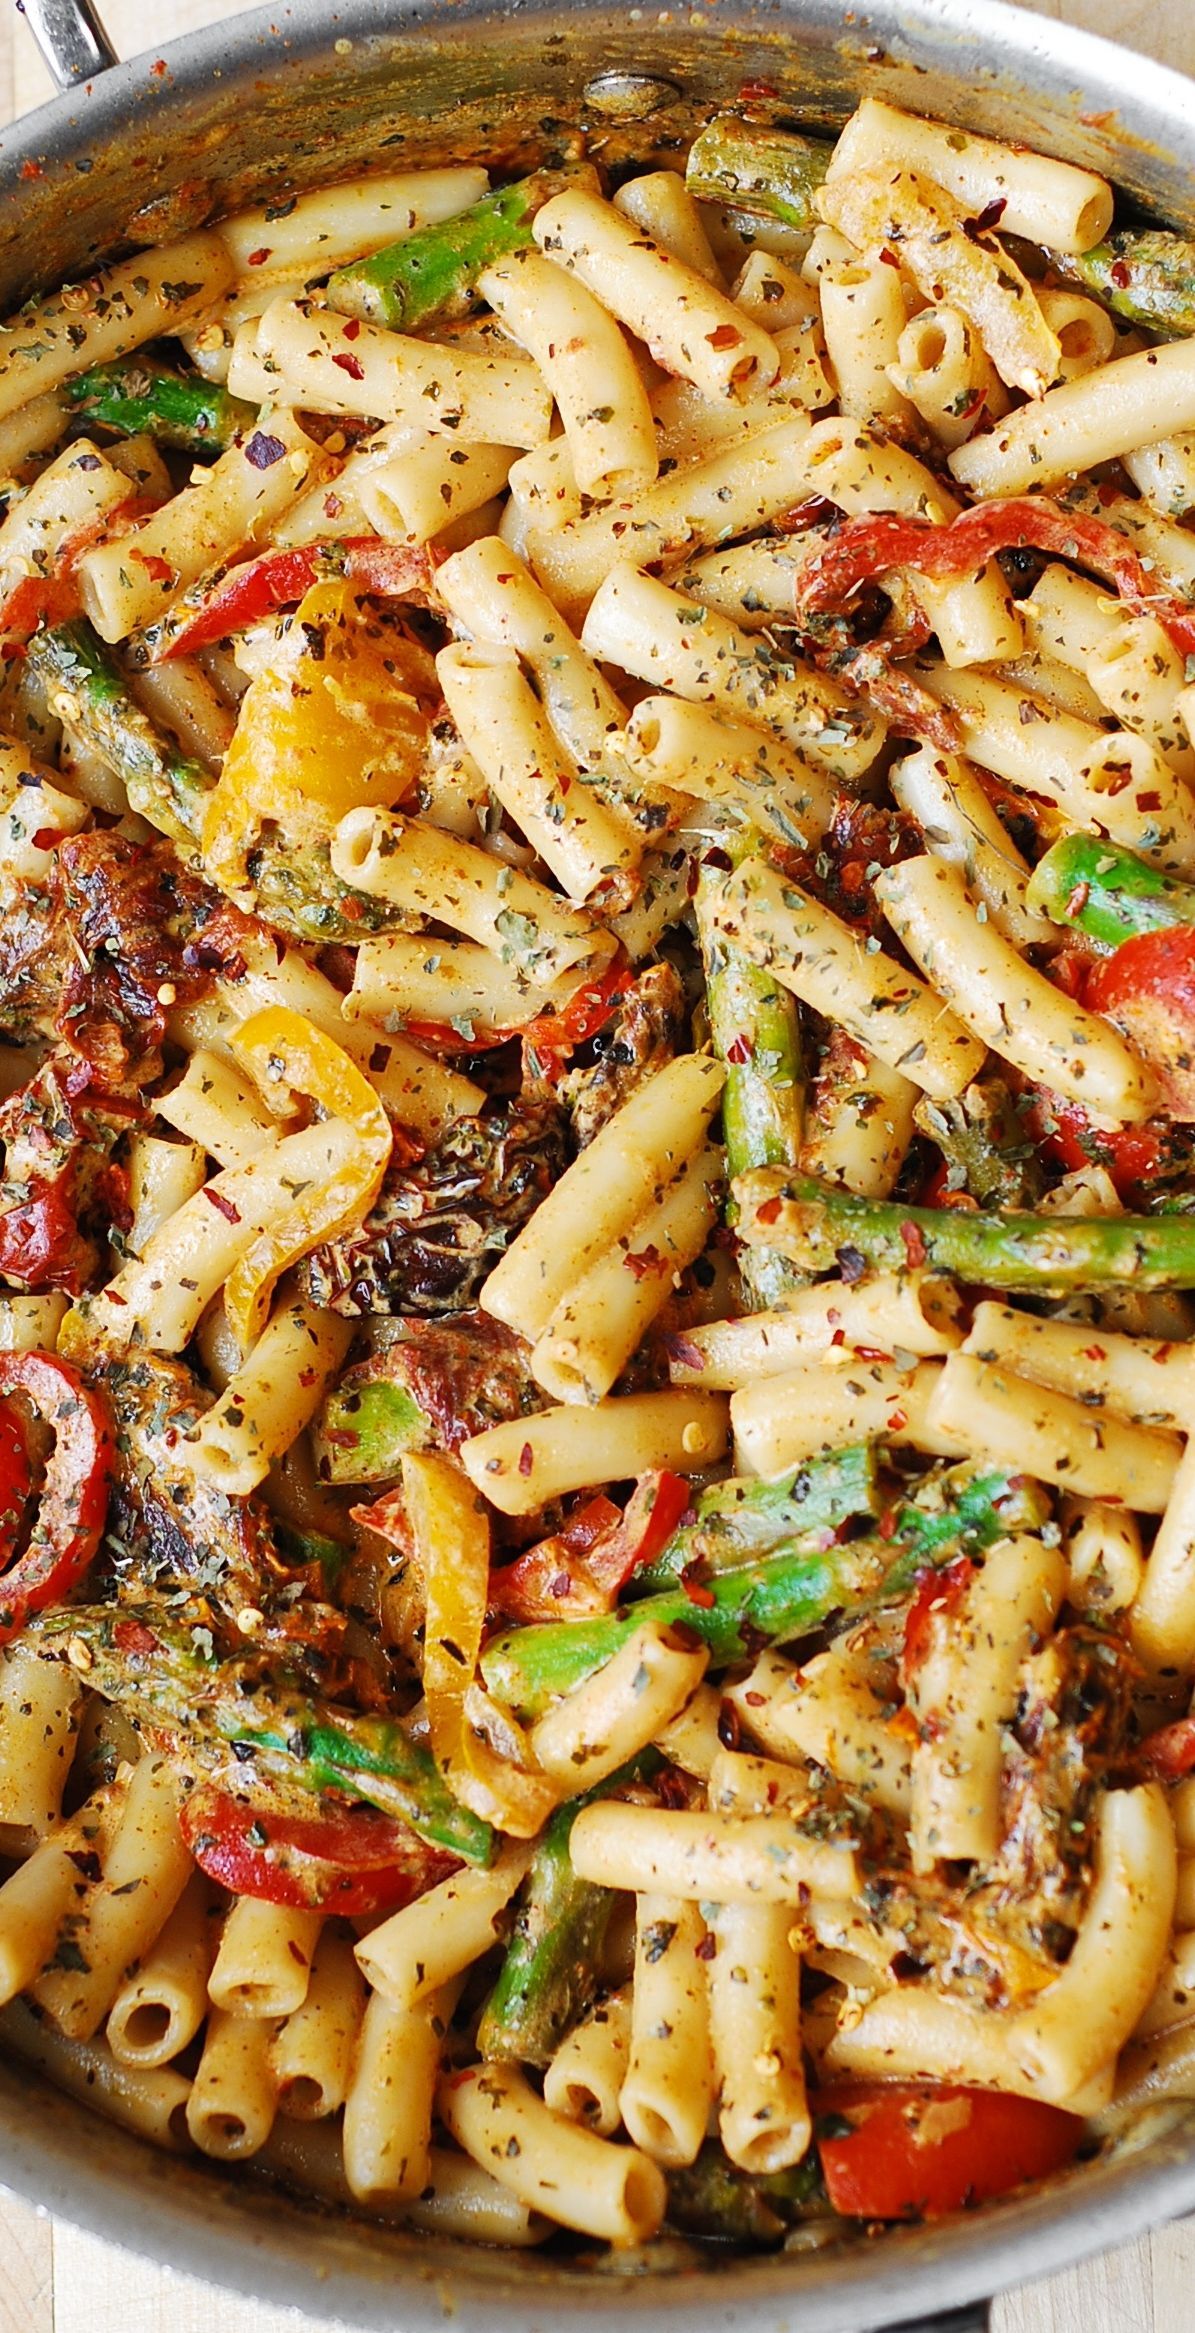 Pasta, Bell Peppers, and Asparagus in a Creamy Sun-Dried Tomato Sauce - The vegetables taste so good with all the spices, pasta, and the flavorful creamy sauce in this Italian pasta dinner! -   22 veggie pasta recipes
 ideas